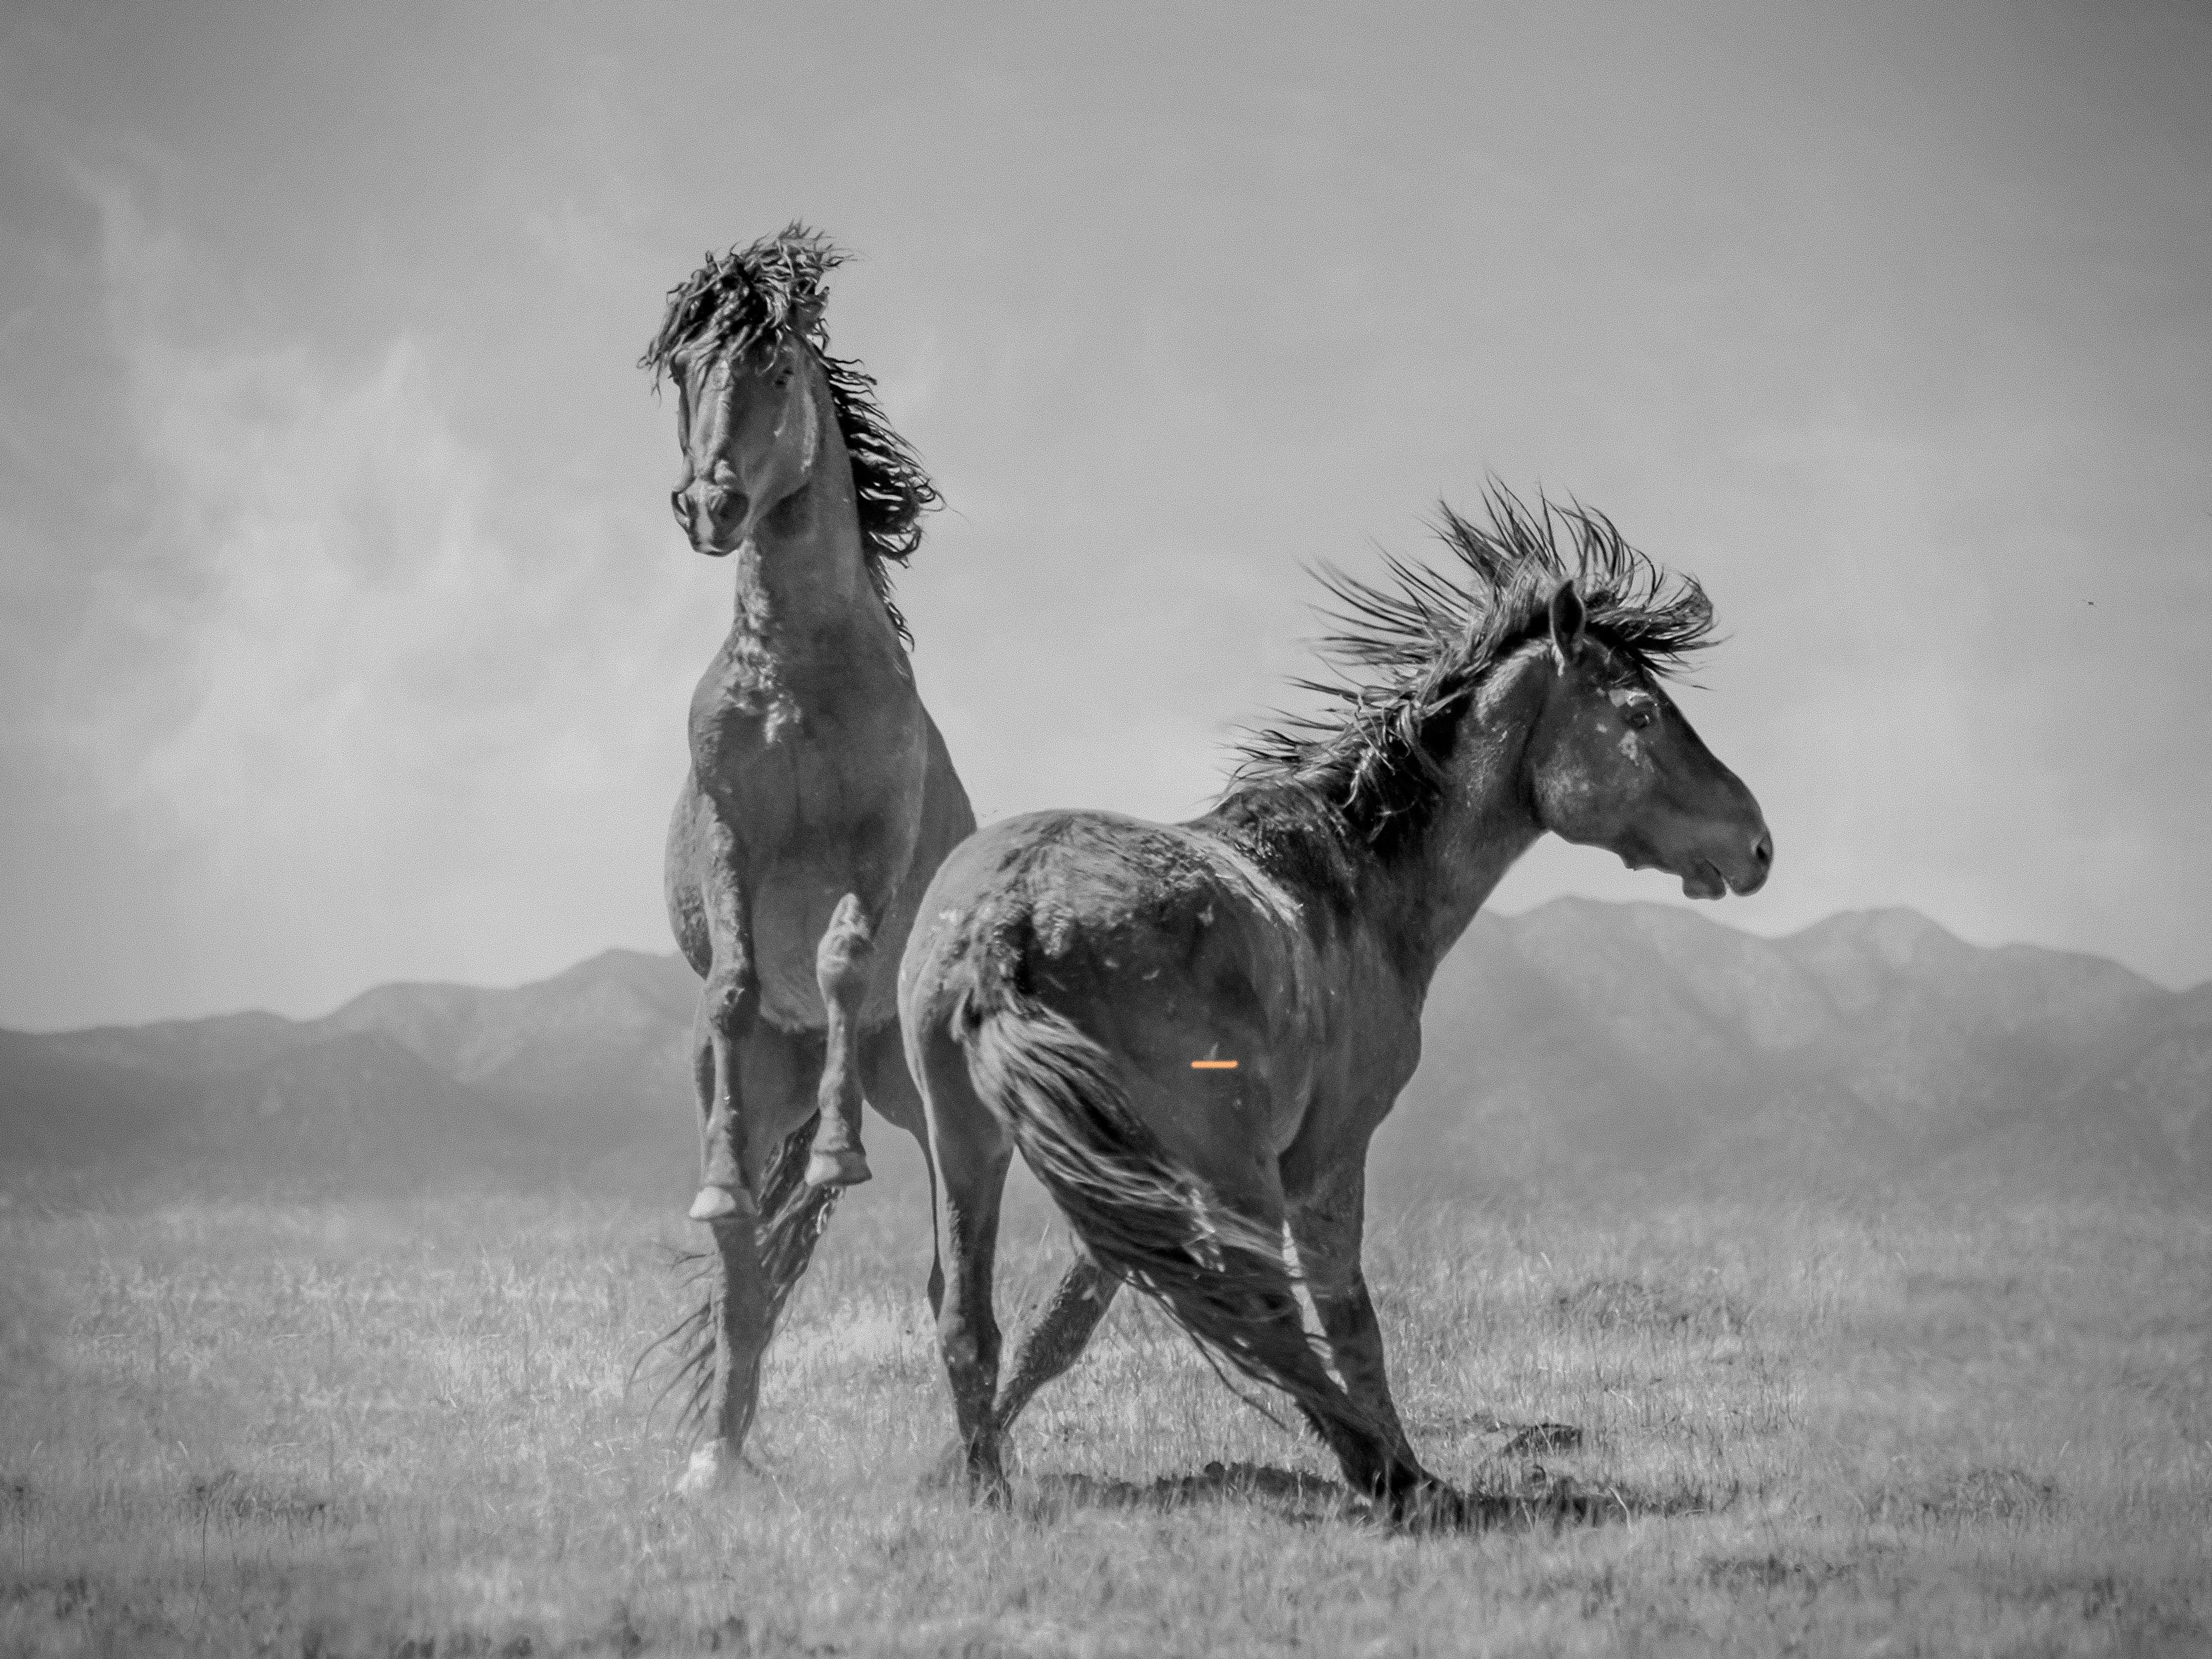 Shane Russeck Black and White Photograph - "Wonder Horses" 40x50 - Black & White Photography, Wild Horses Mustangs Western 